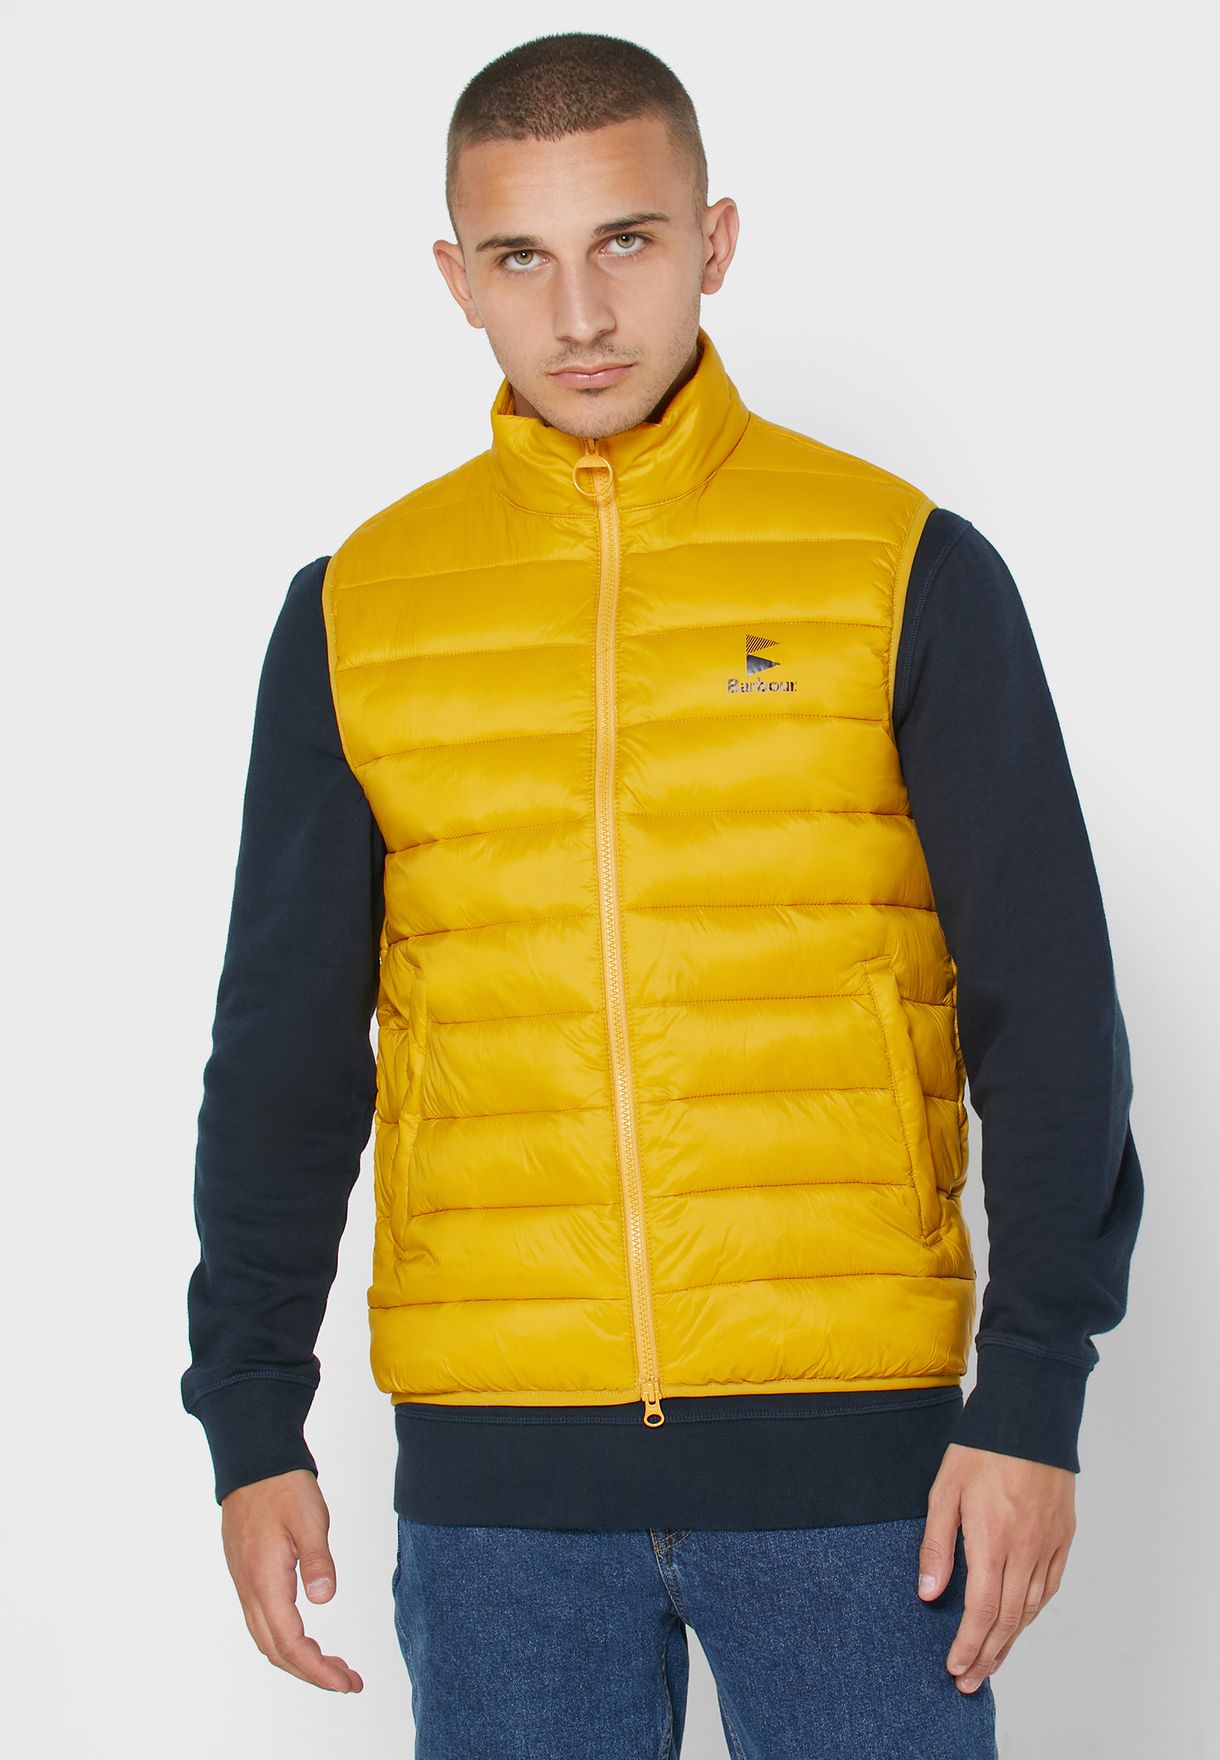 barbour yellow jacket mens